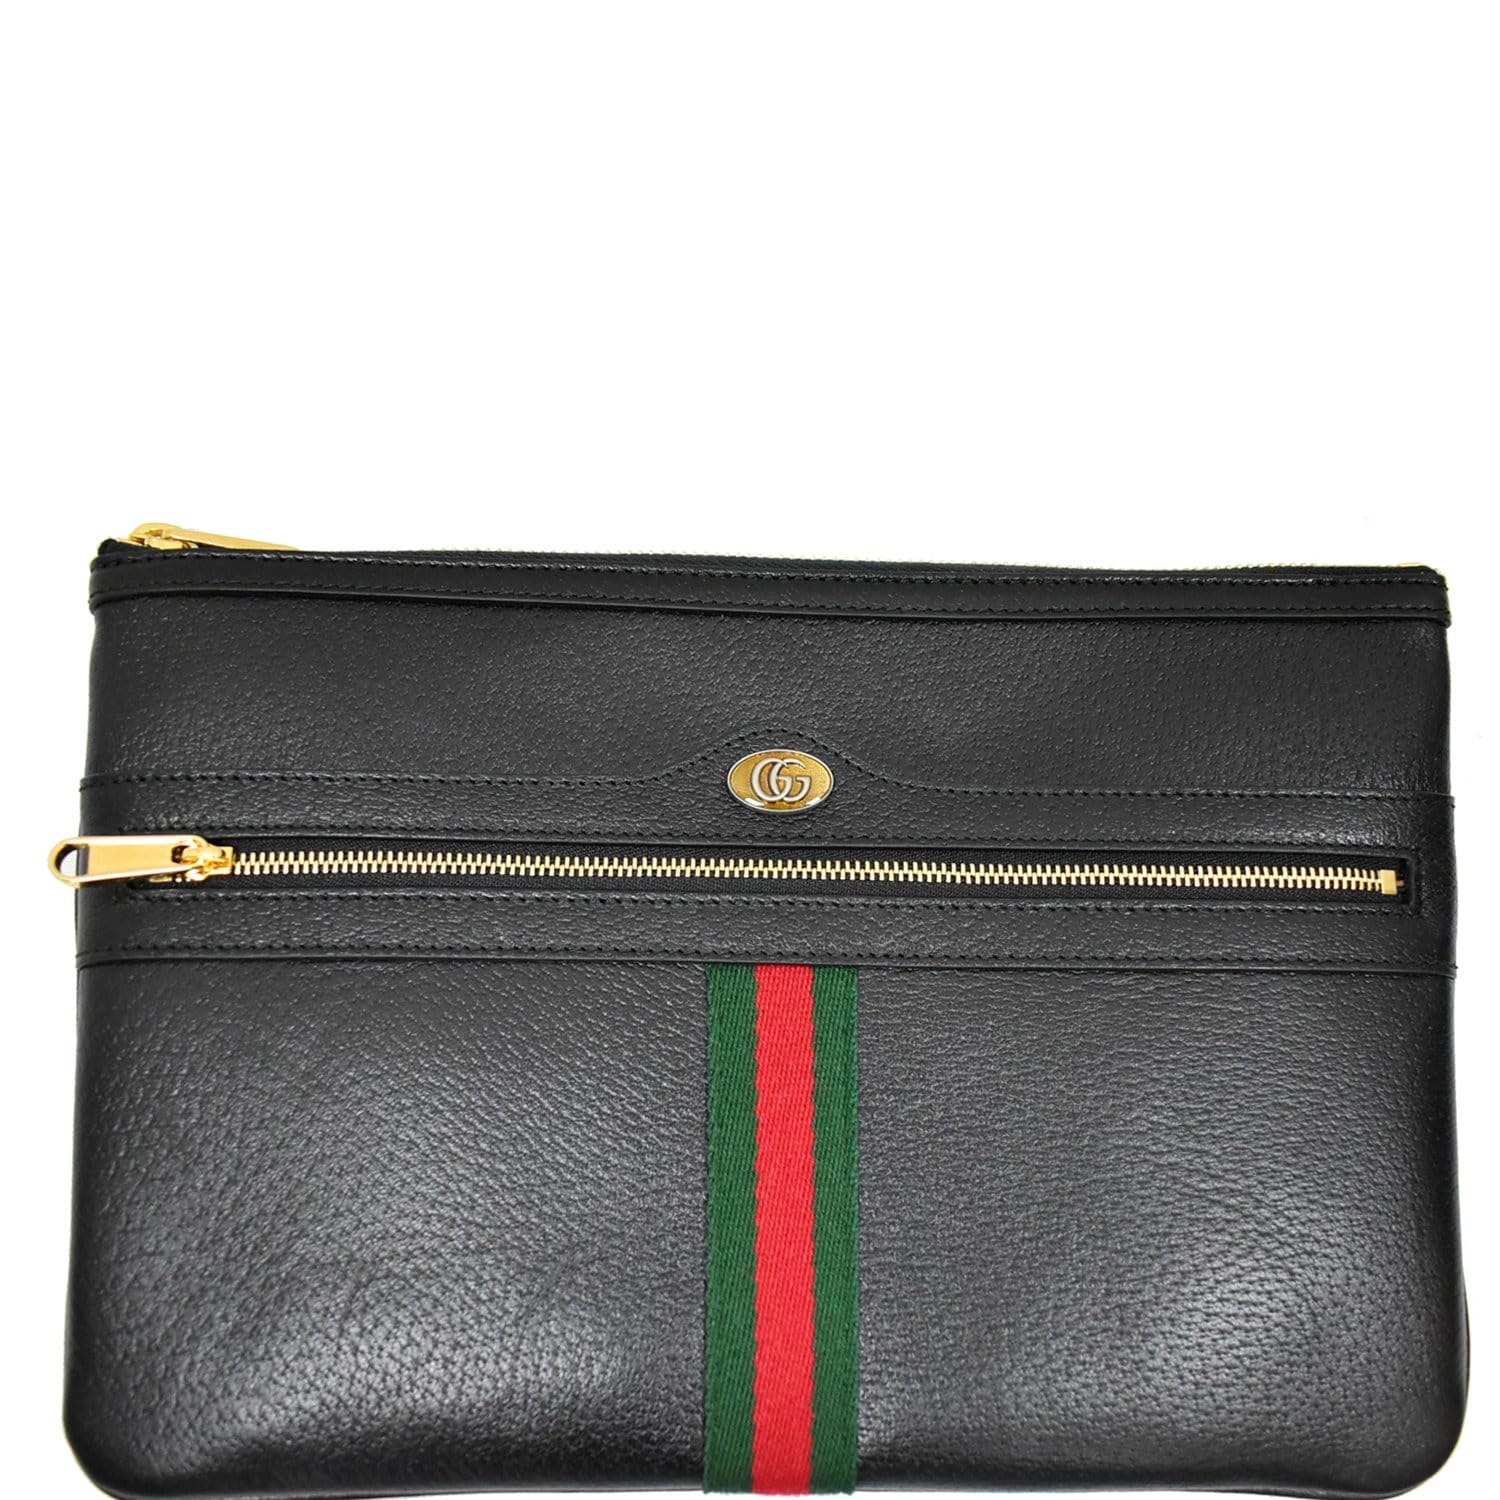 Leather Handbags Gucci bag with pouch